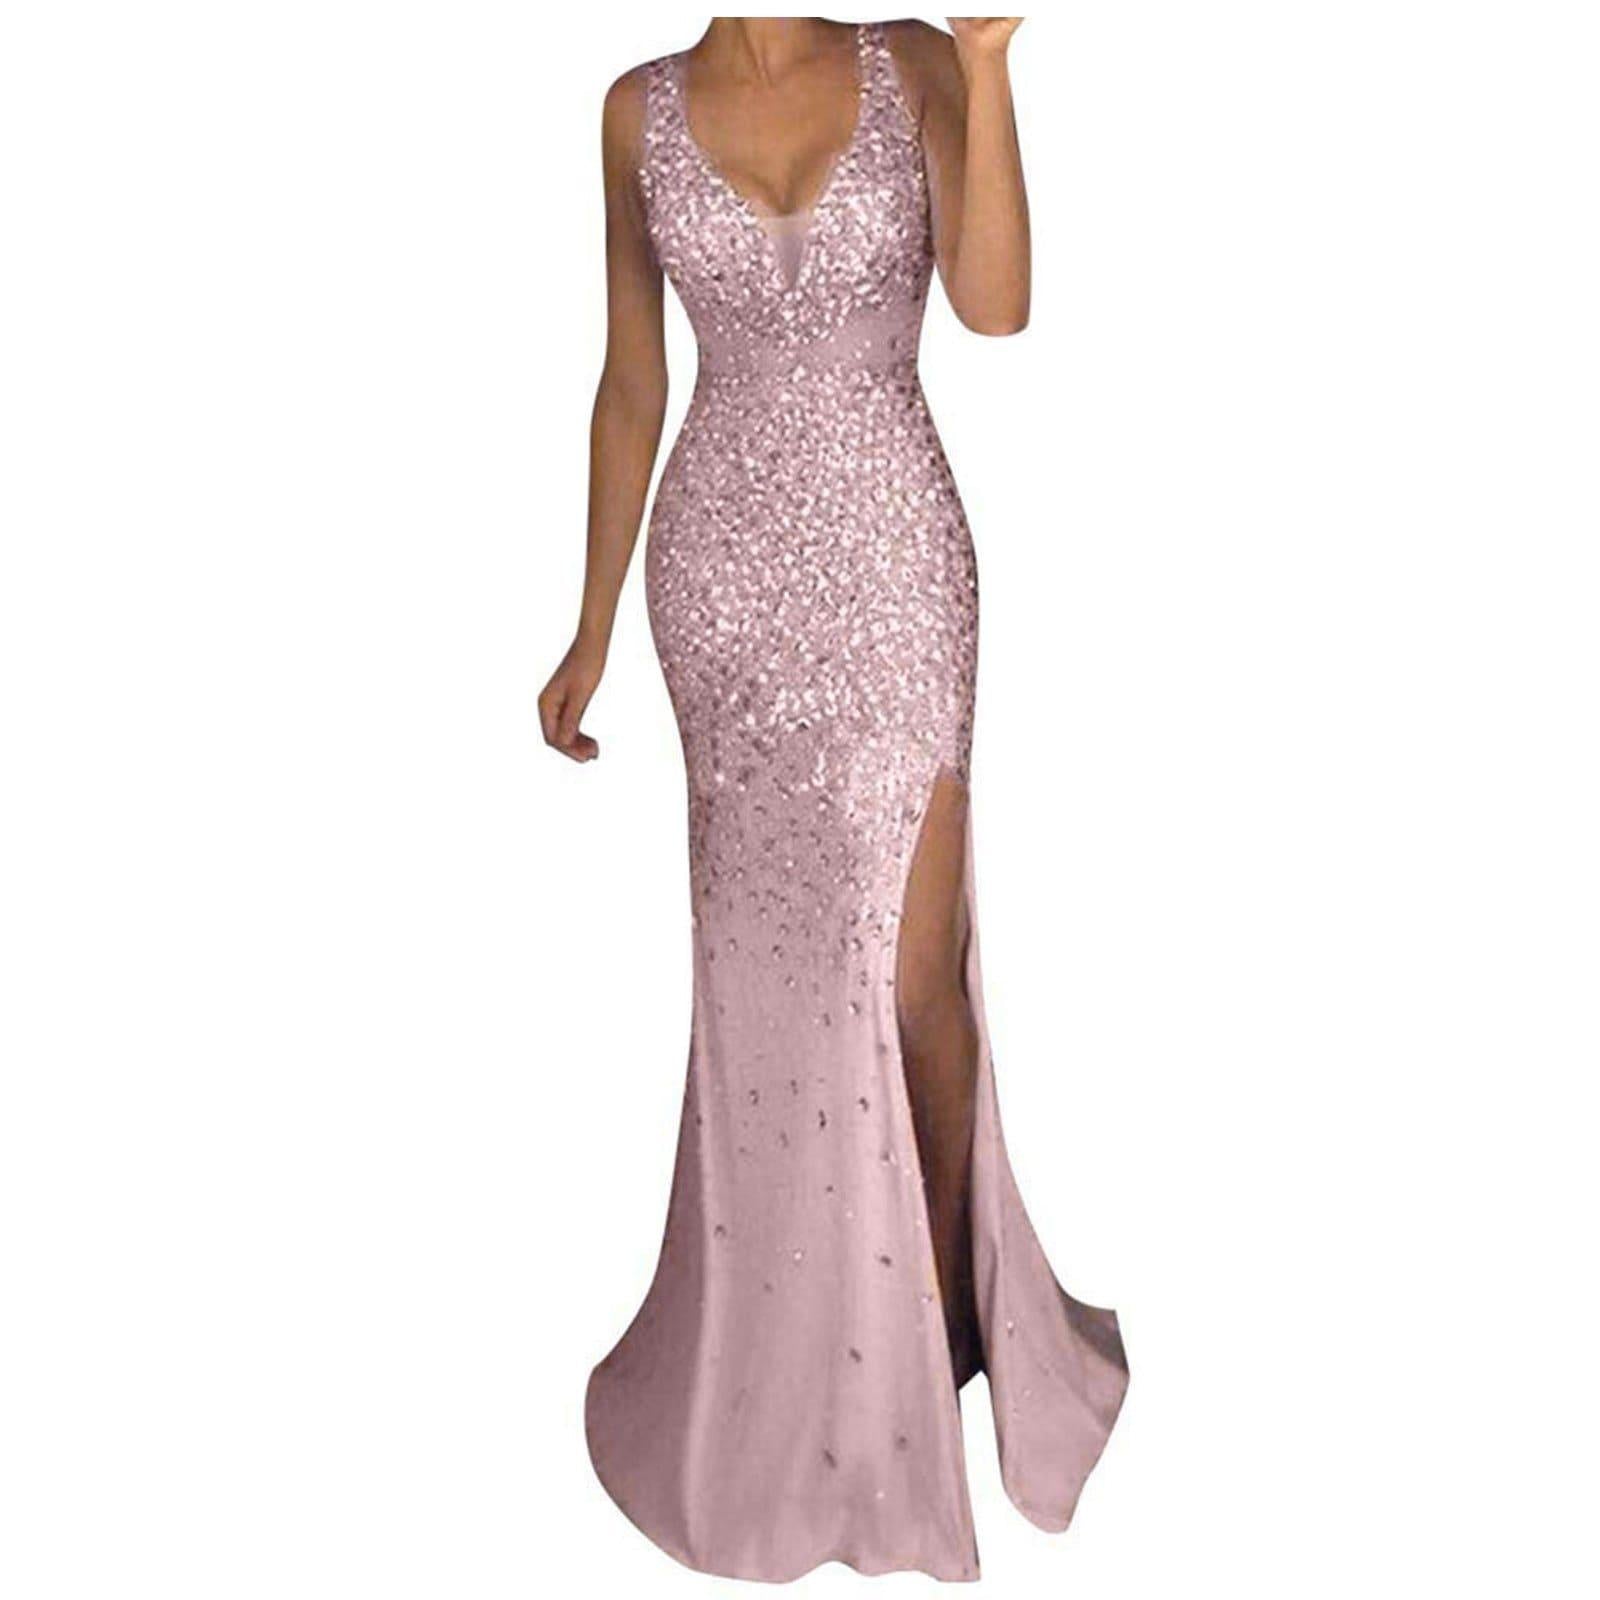 Sparkly Bodycon Gown & Elegant Party Dress For Women - For Women USA